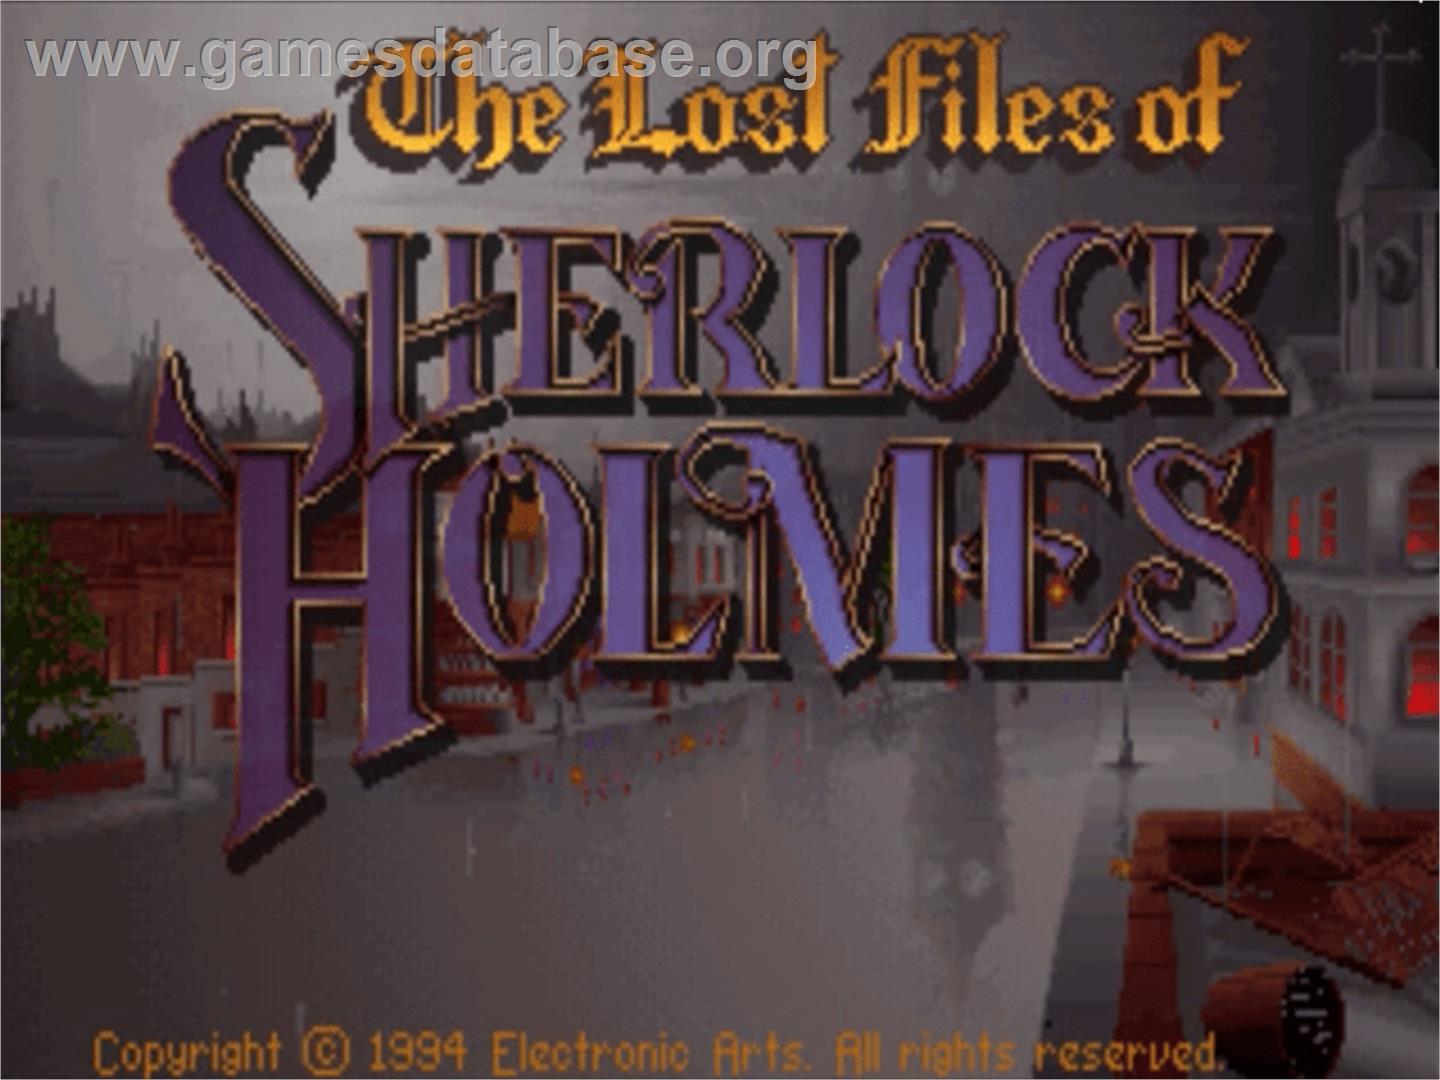 Lost Files of Sherlock Holmes: The Case of the Serrated Scalpel - Panasonic 3DO - Artwork - Title Screen